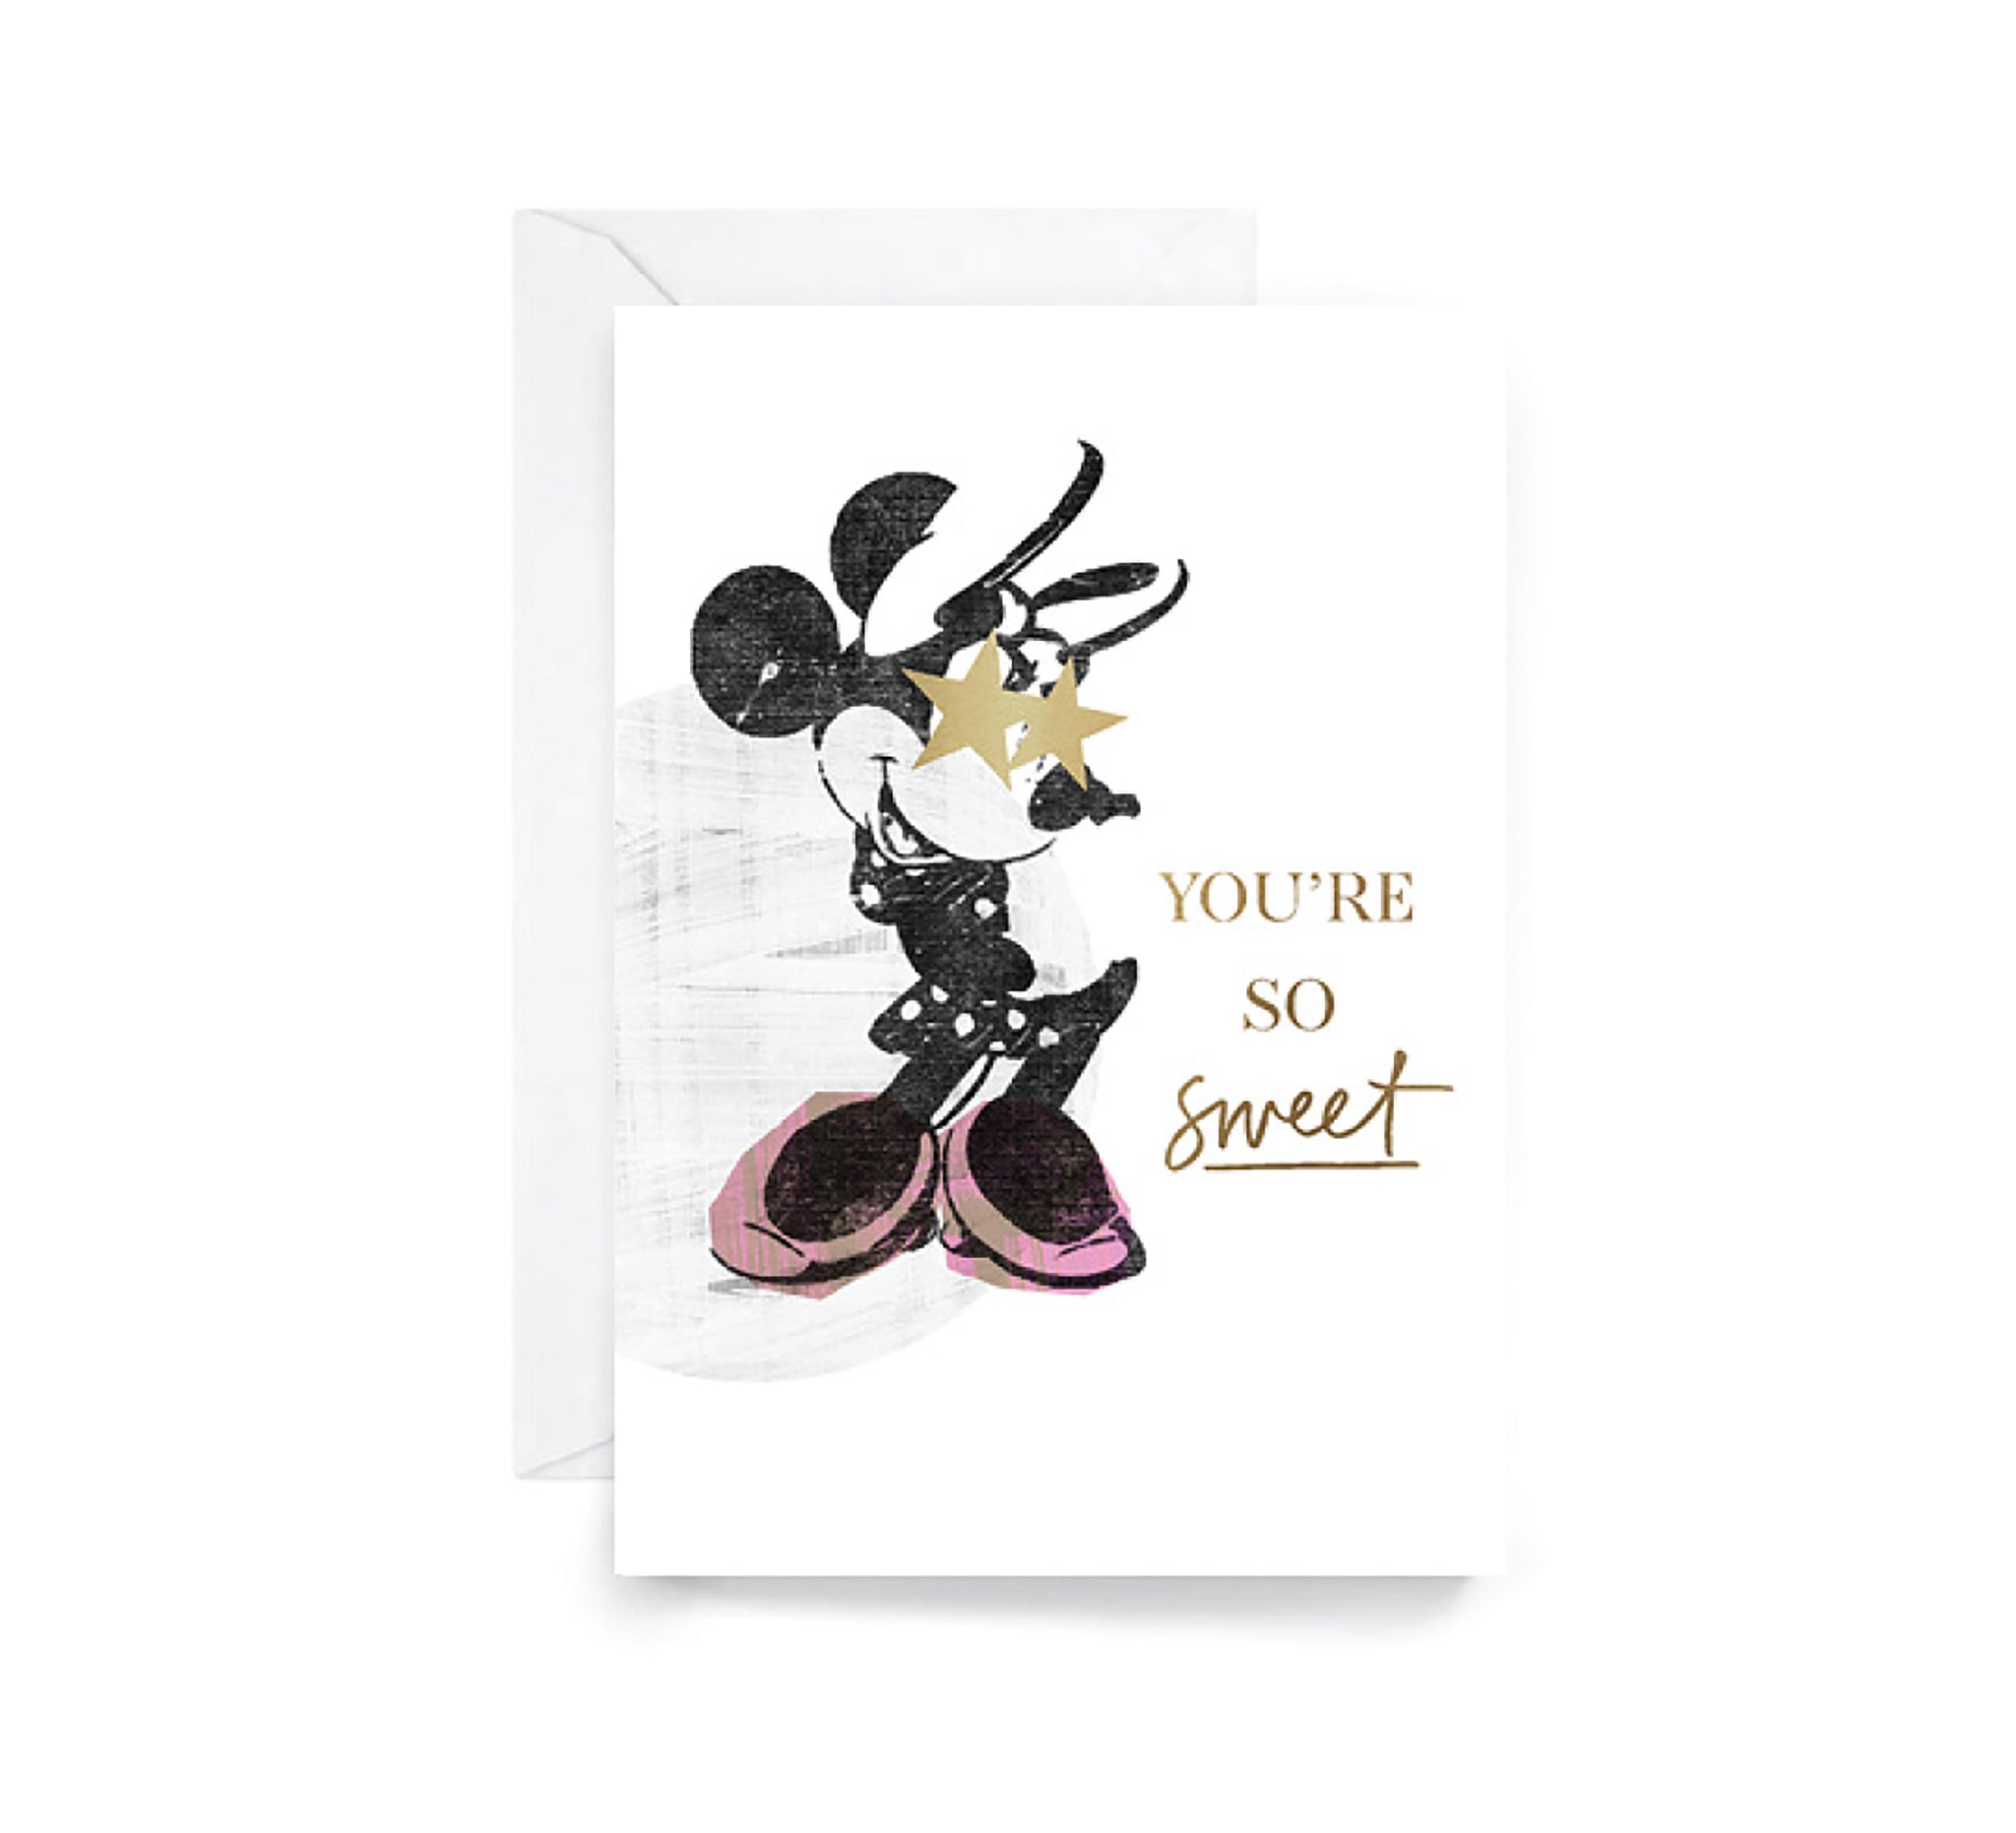 07. SO SWEET CARDS - (PACK OF 6)